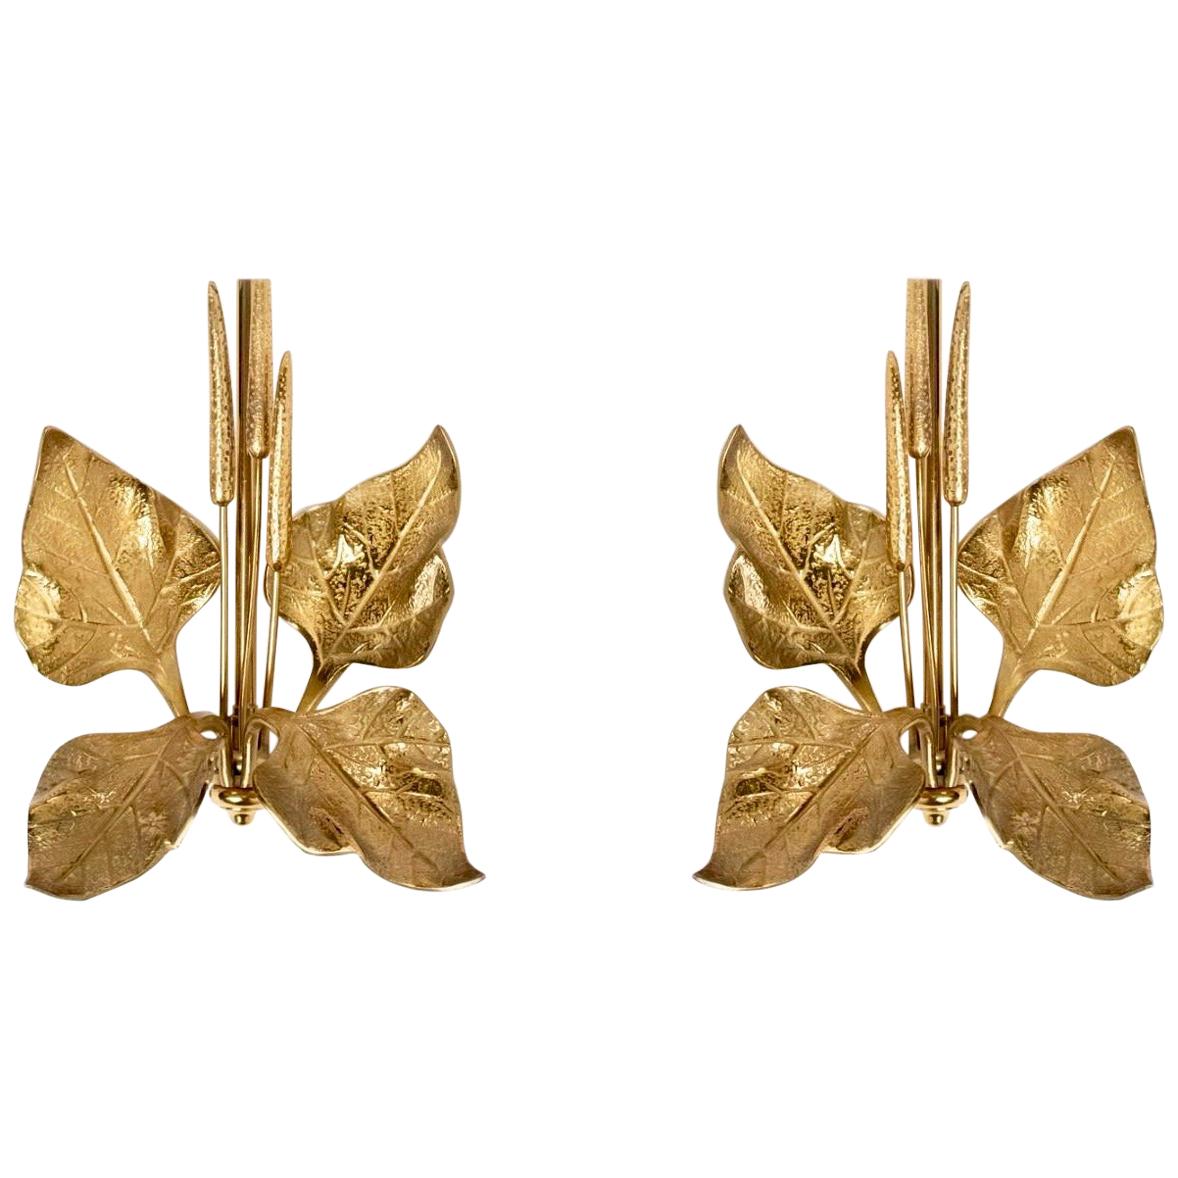 1950s Pair of Maison Charles Foliage bronze sconces.

The sconce body made of gilded bronze figures four leaves with three stylized flowers. The off-white cotton lamp shades are mounted on a brass stem.

One bulb per sconces.
  